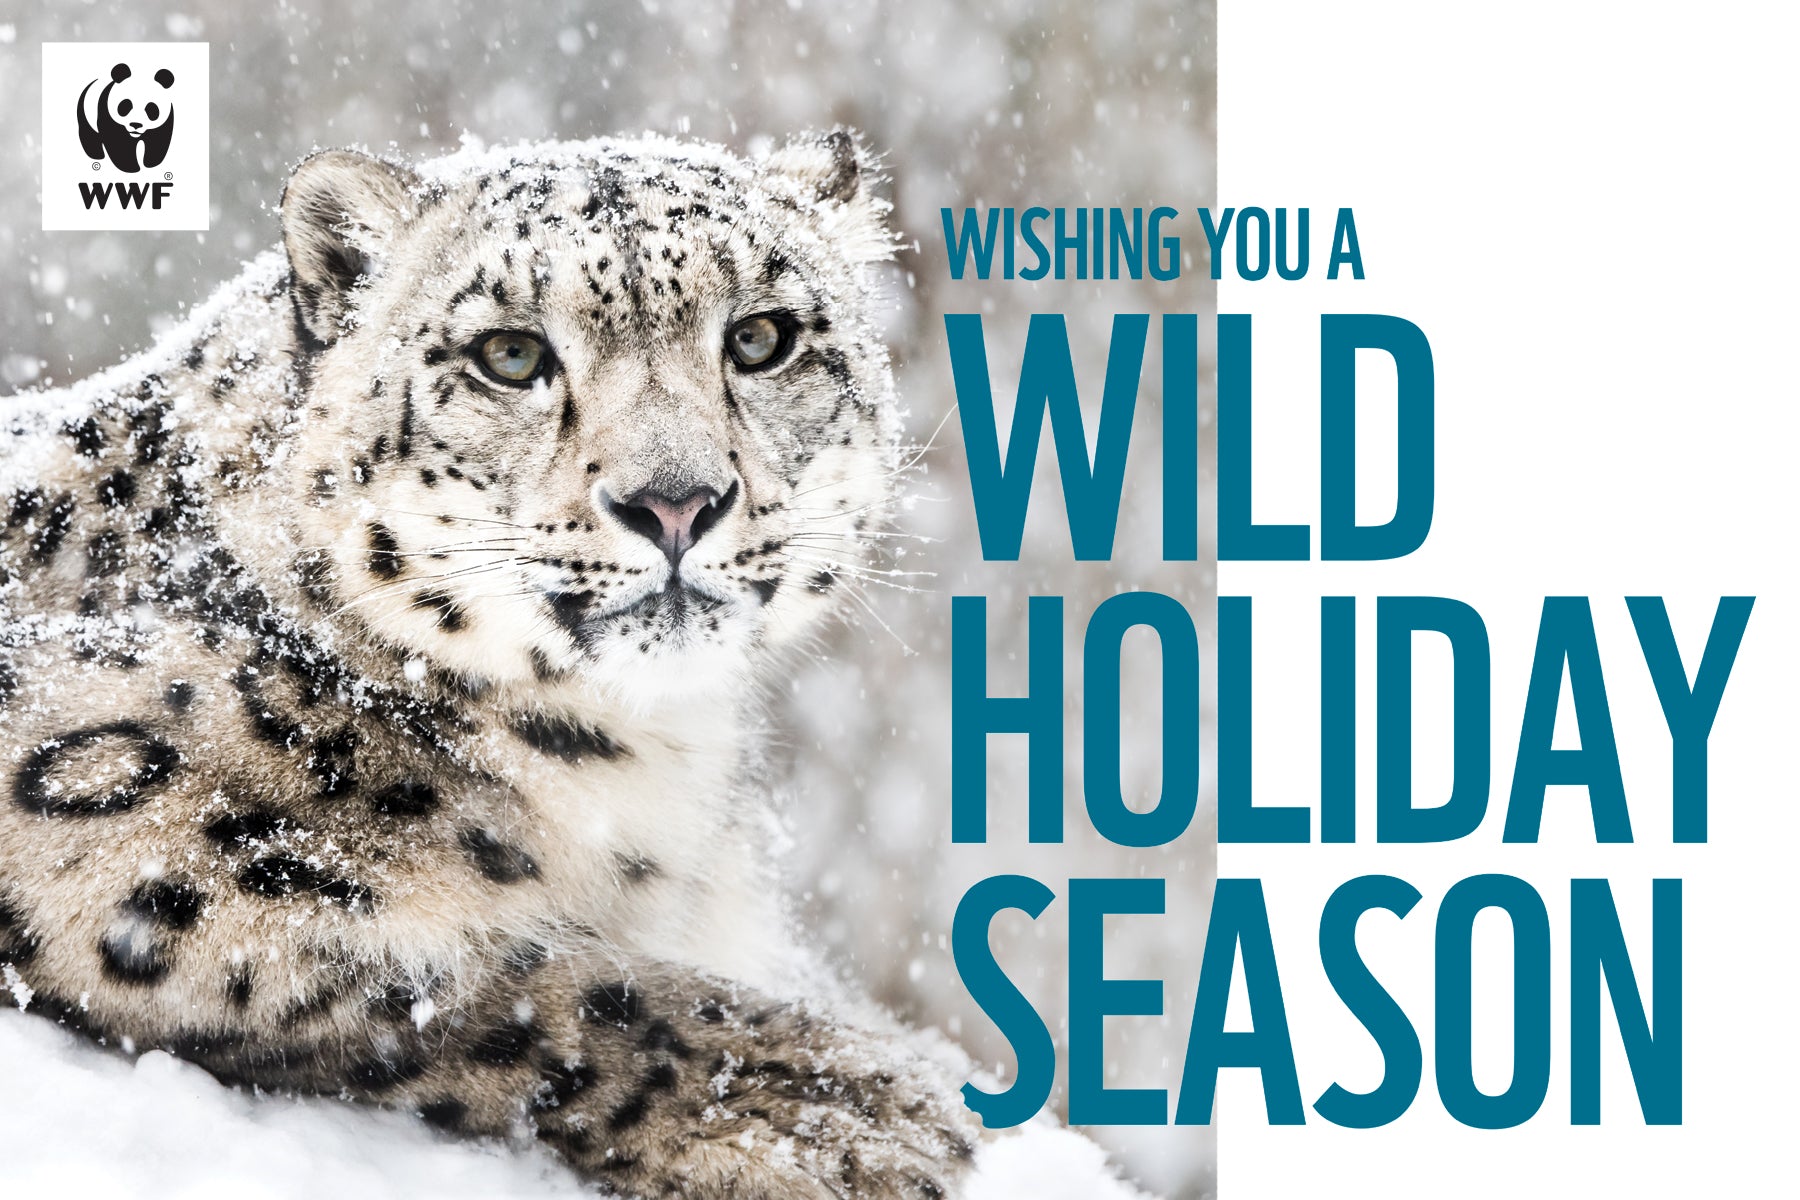 Holiday greeting card - snow leopard image. "Wishing you a wild holiday season"